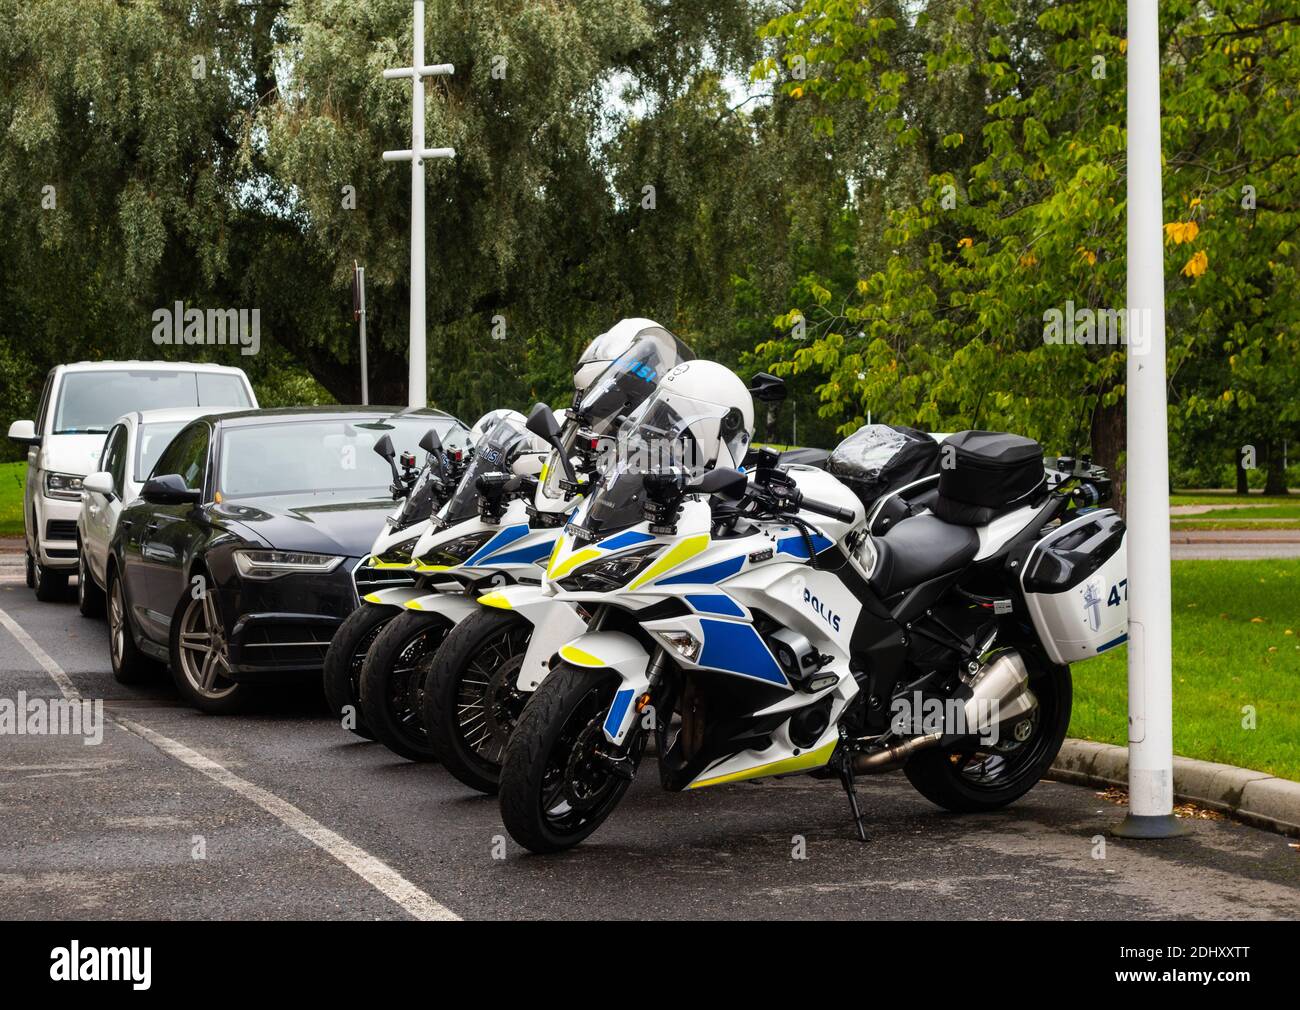 Editorial 09.11.2020 Helsinki Finland Police motorbikes parked outside a lunch restaurant on a summer day Stock Photo